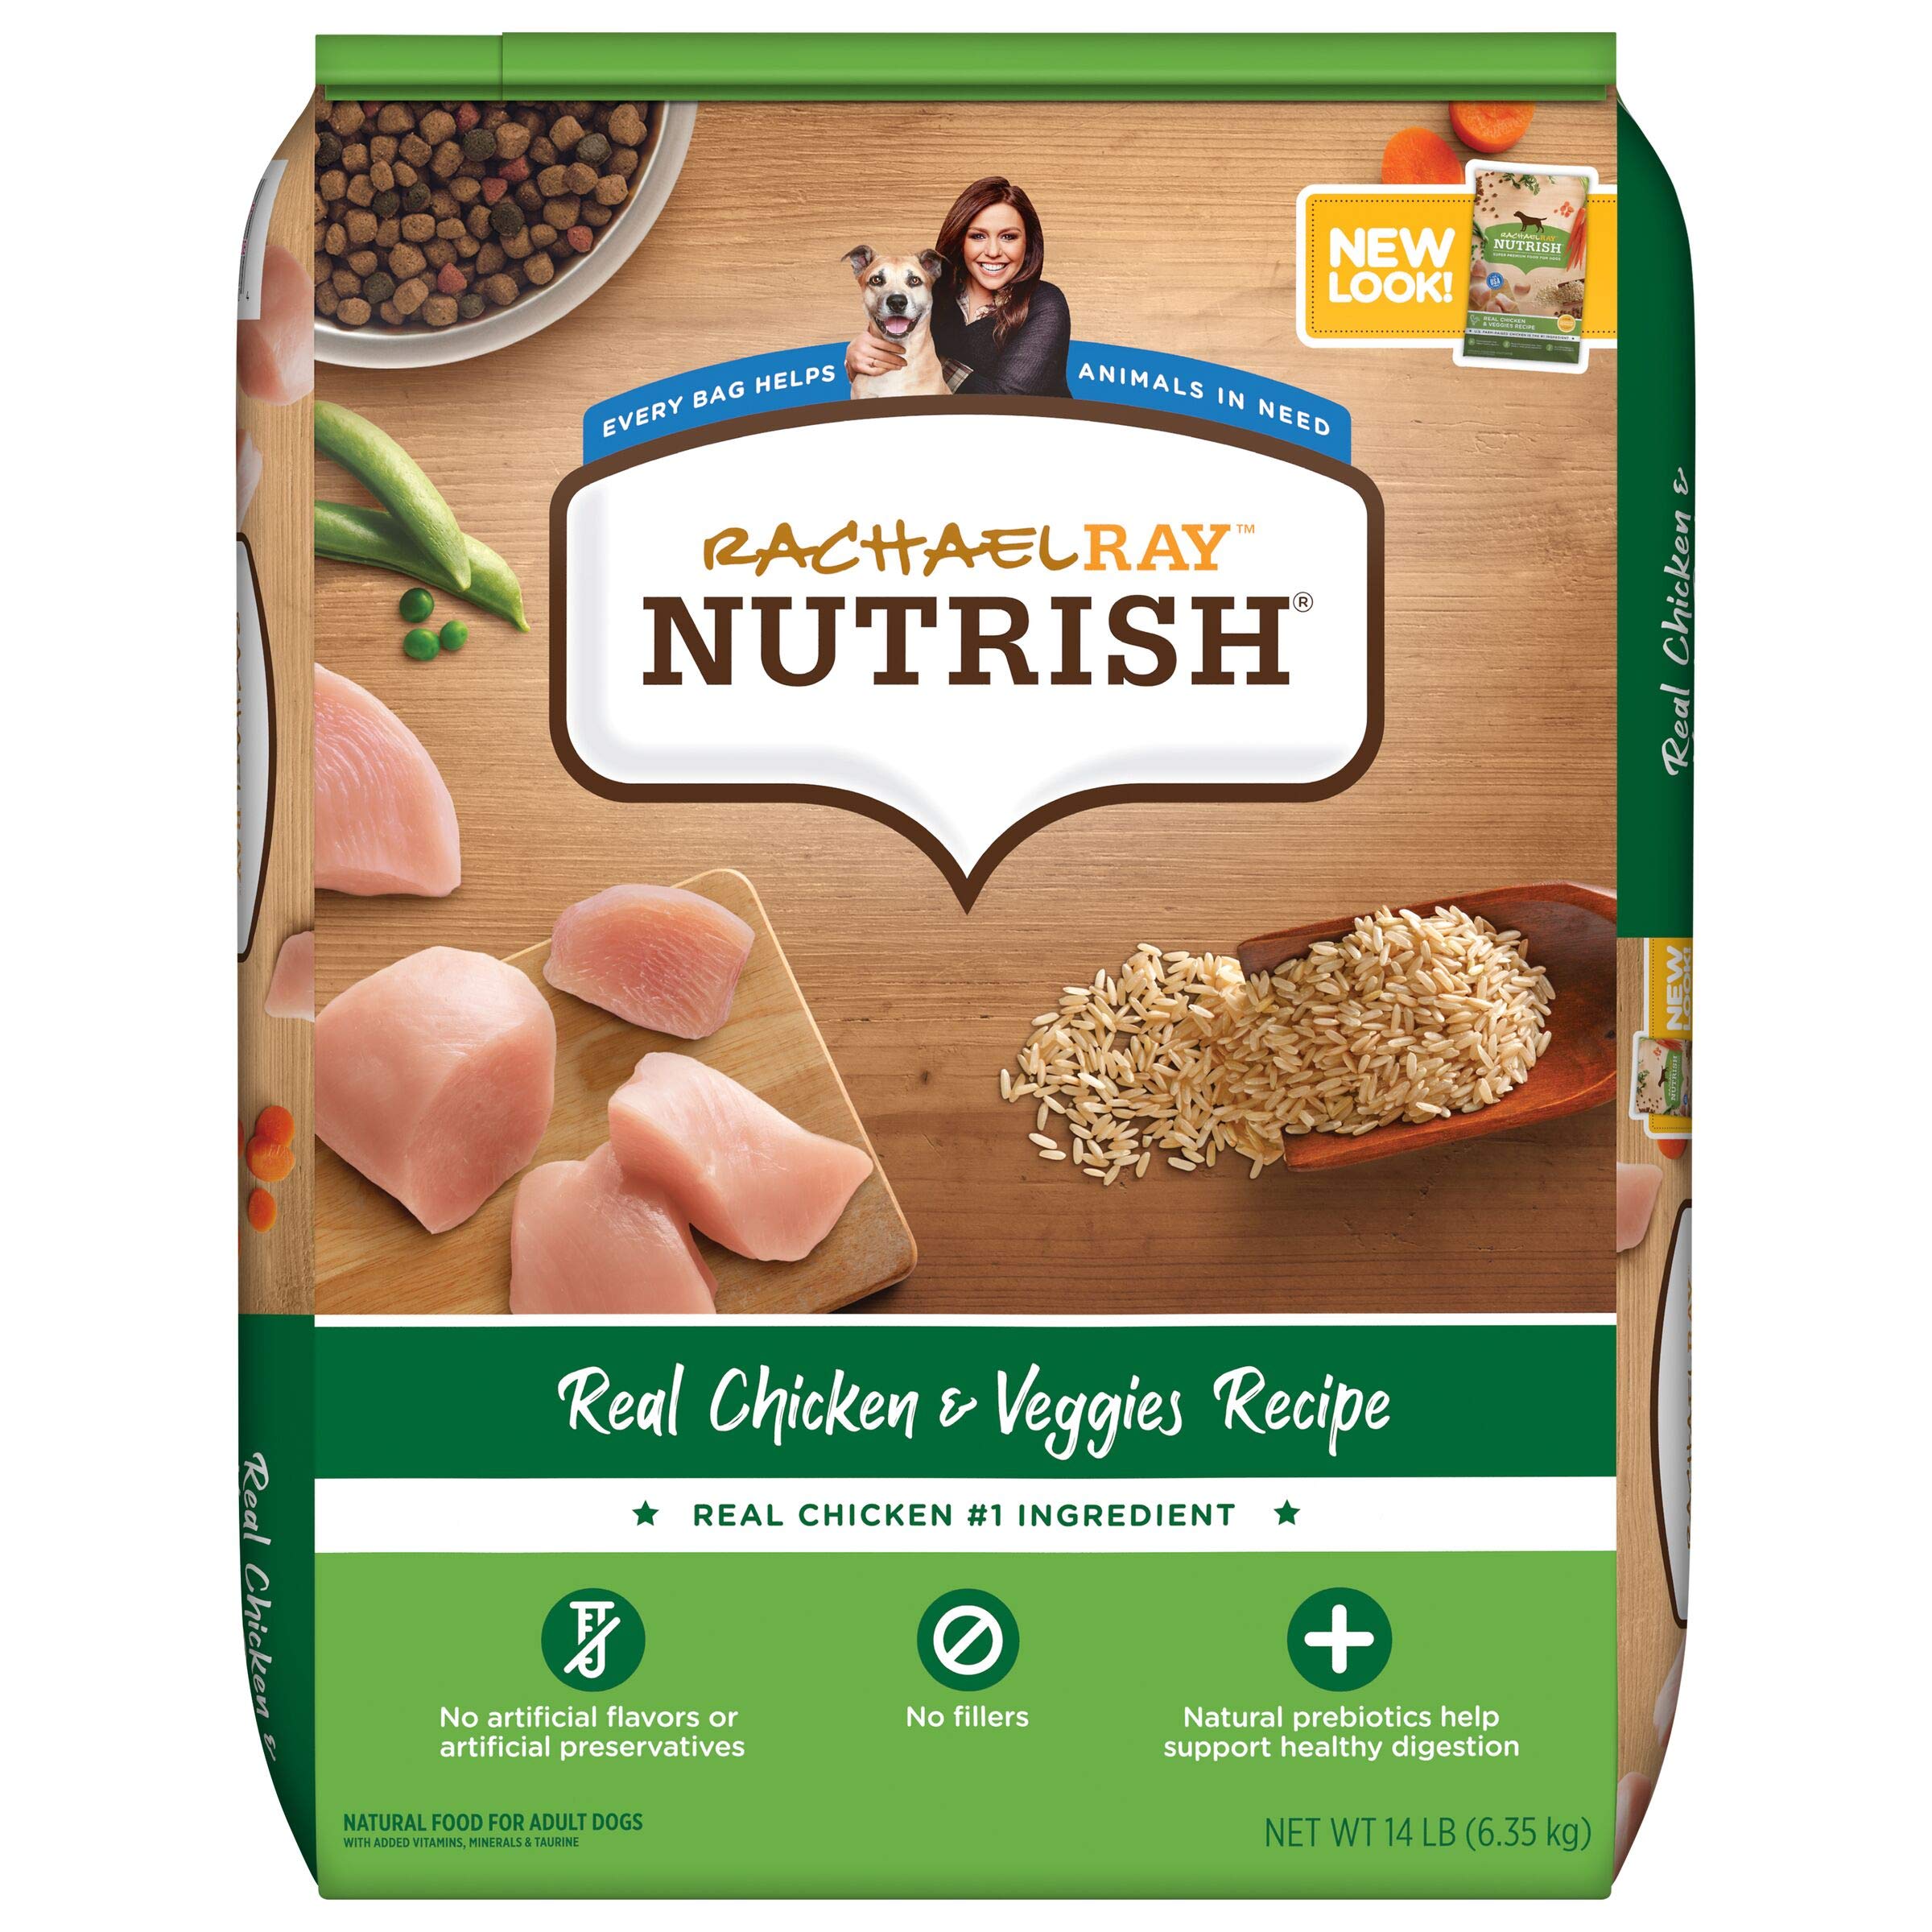 Rachel Ray Nutrish Dog Food 14 lbs for $8.59 (less sub + save) .63 < a pound $8.58